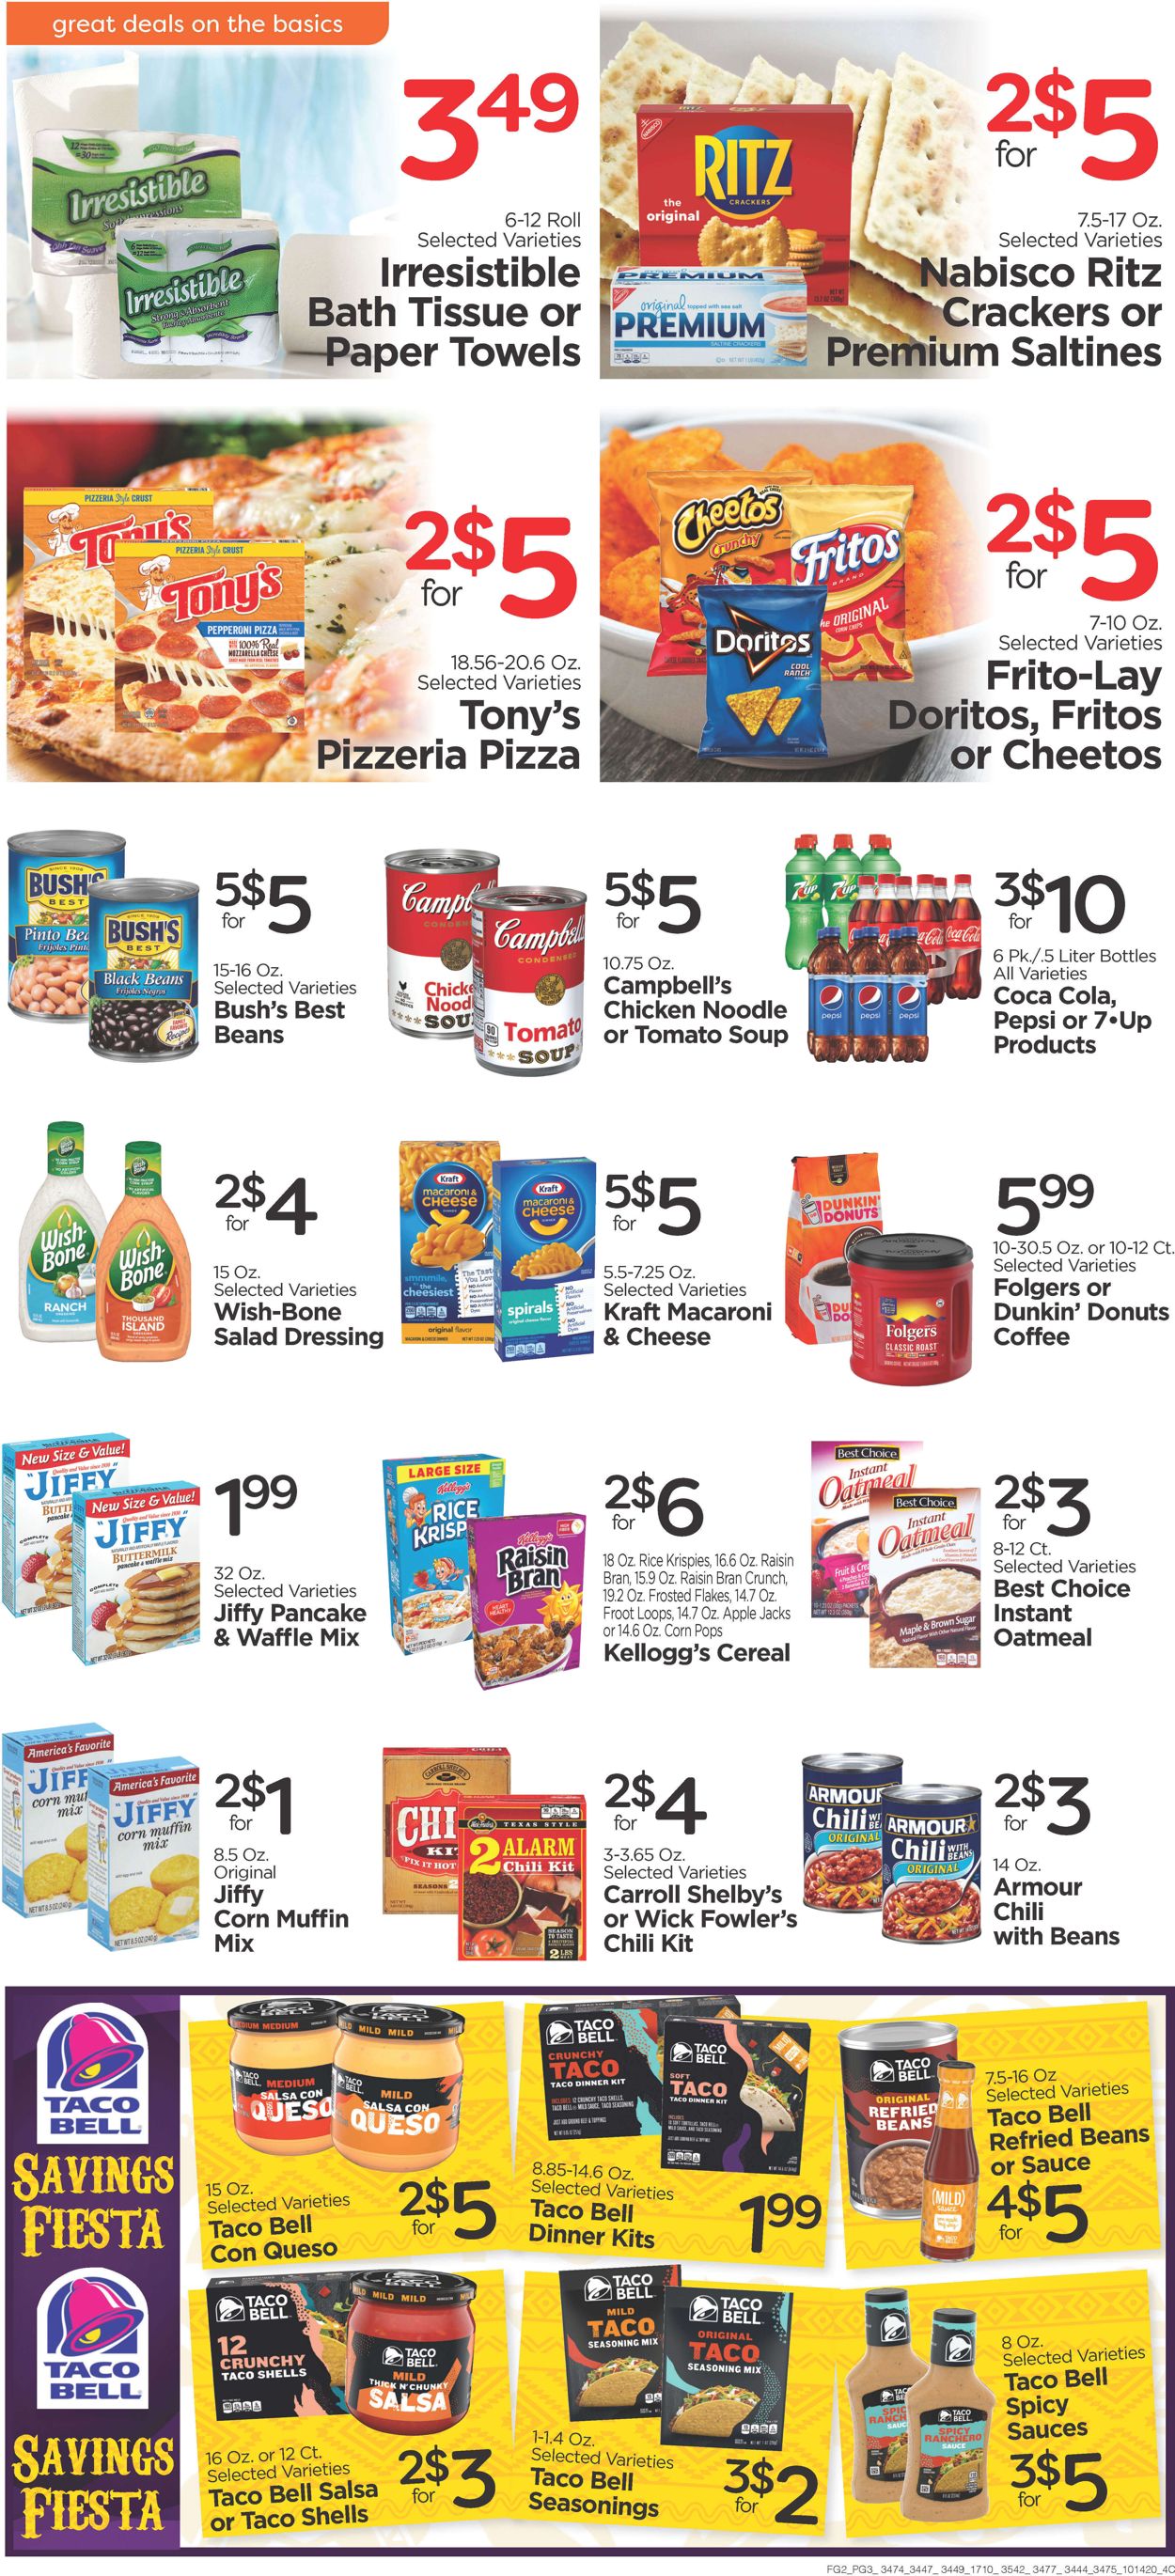 Catalogue Edwards Food Giant from 10/14/2020